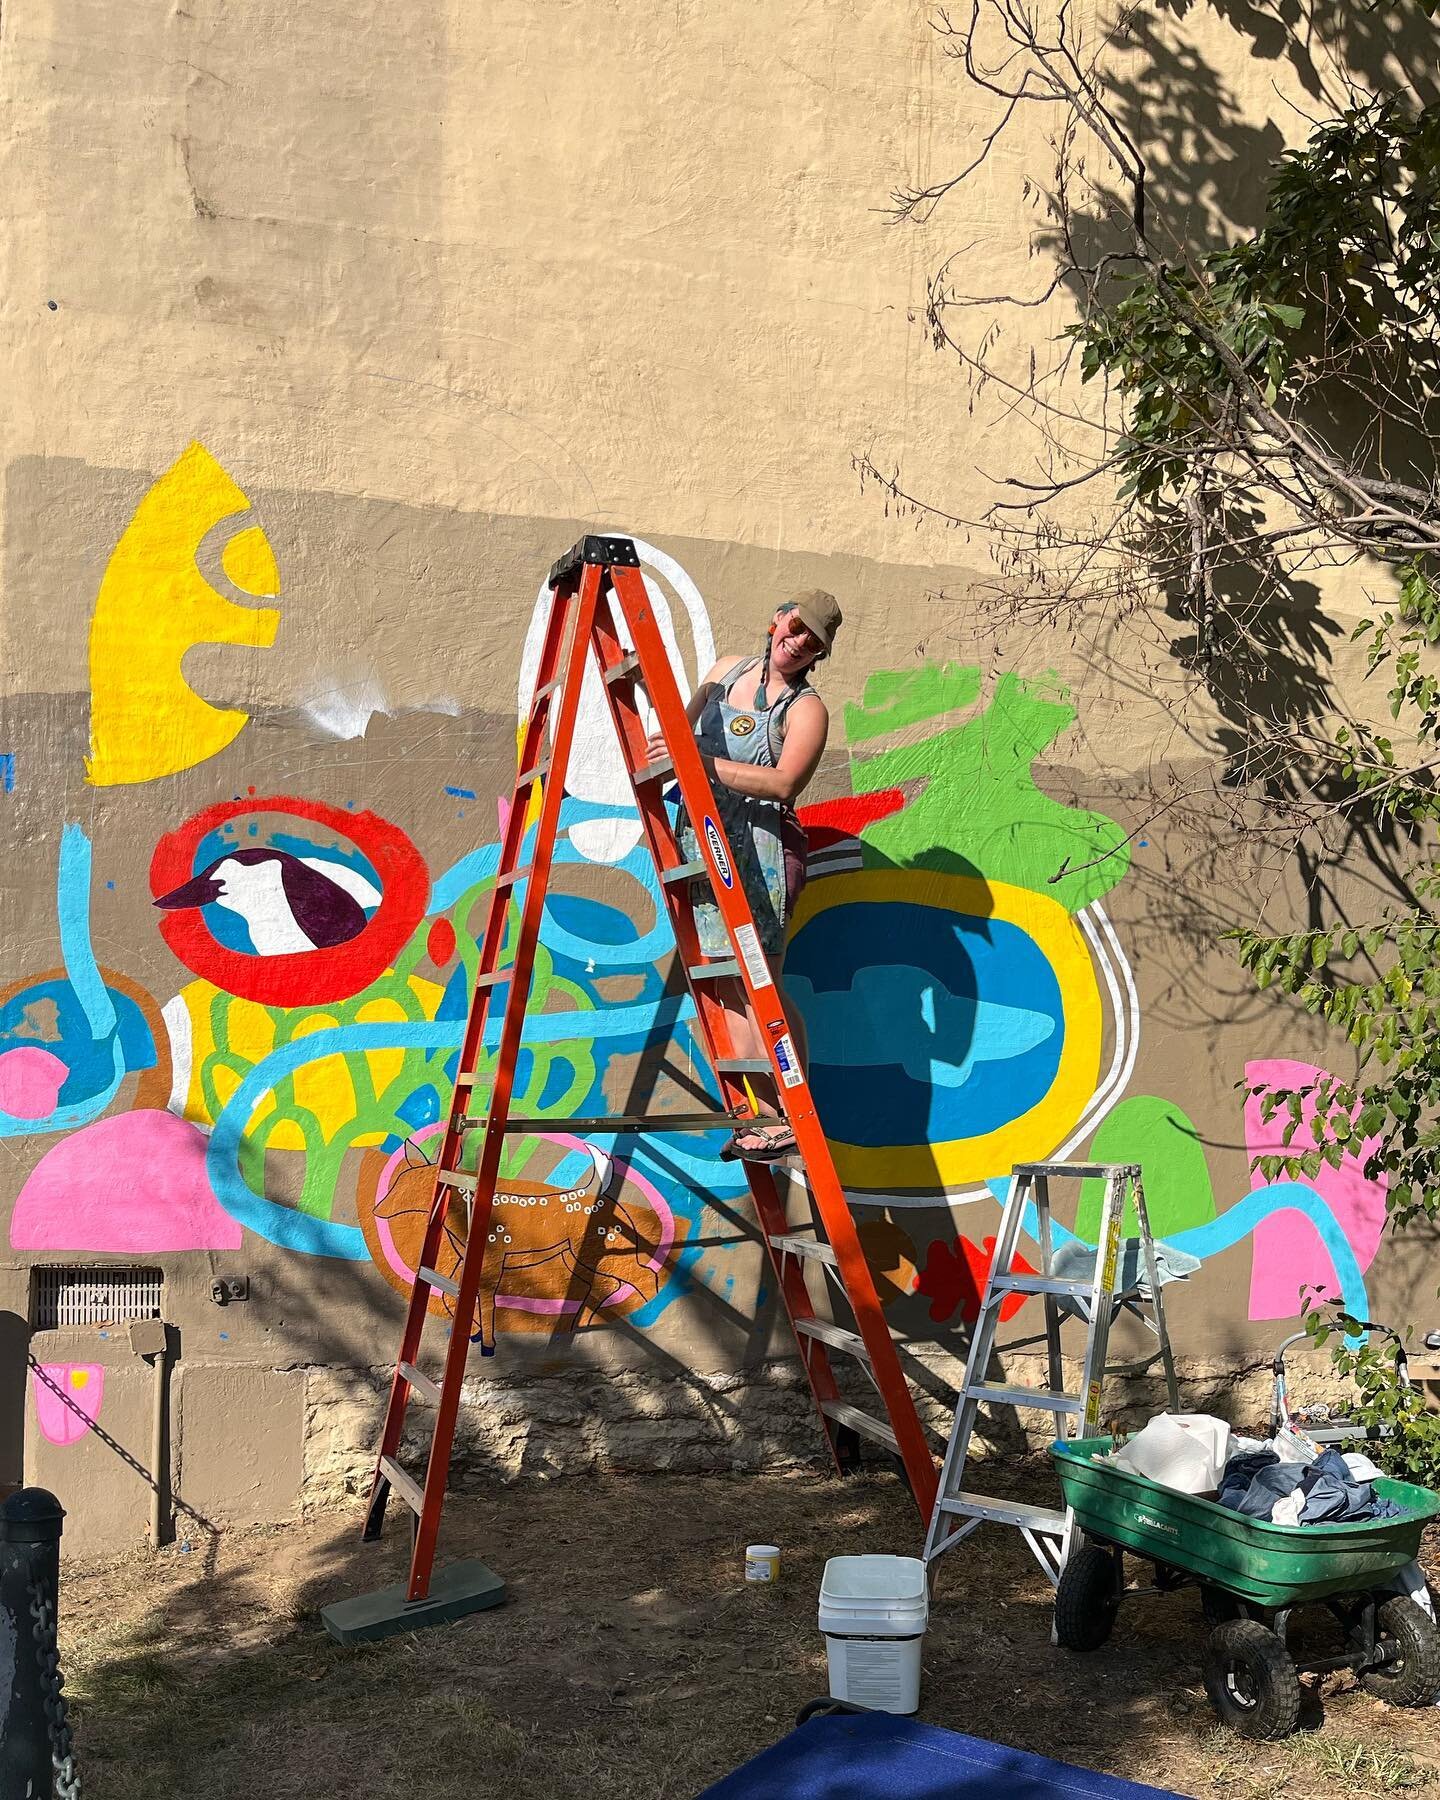 Work ! In ! Progress ! 
It&rsquo;s a race against the weather as this paint gets cranky when it is over 85 or under 65 degrees (same) so cross your fingers for some warm days next week! 
🍂 🎨 
This rainbow explosion is made  possible by @nestnorthsi